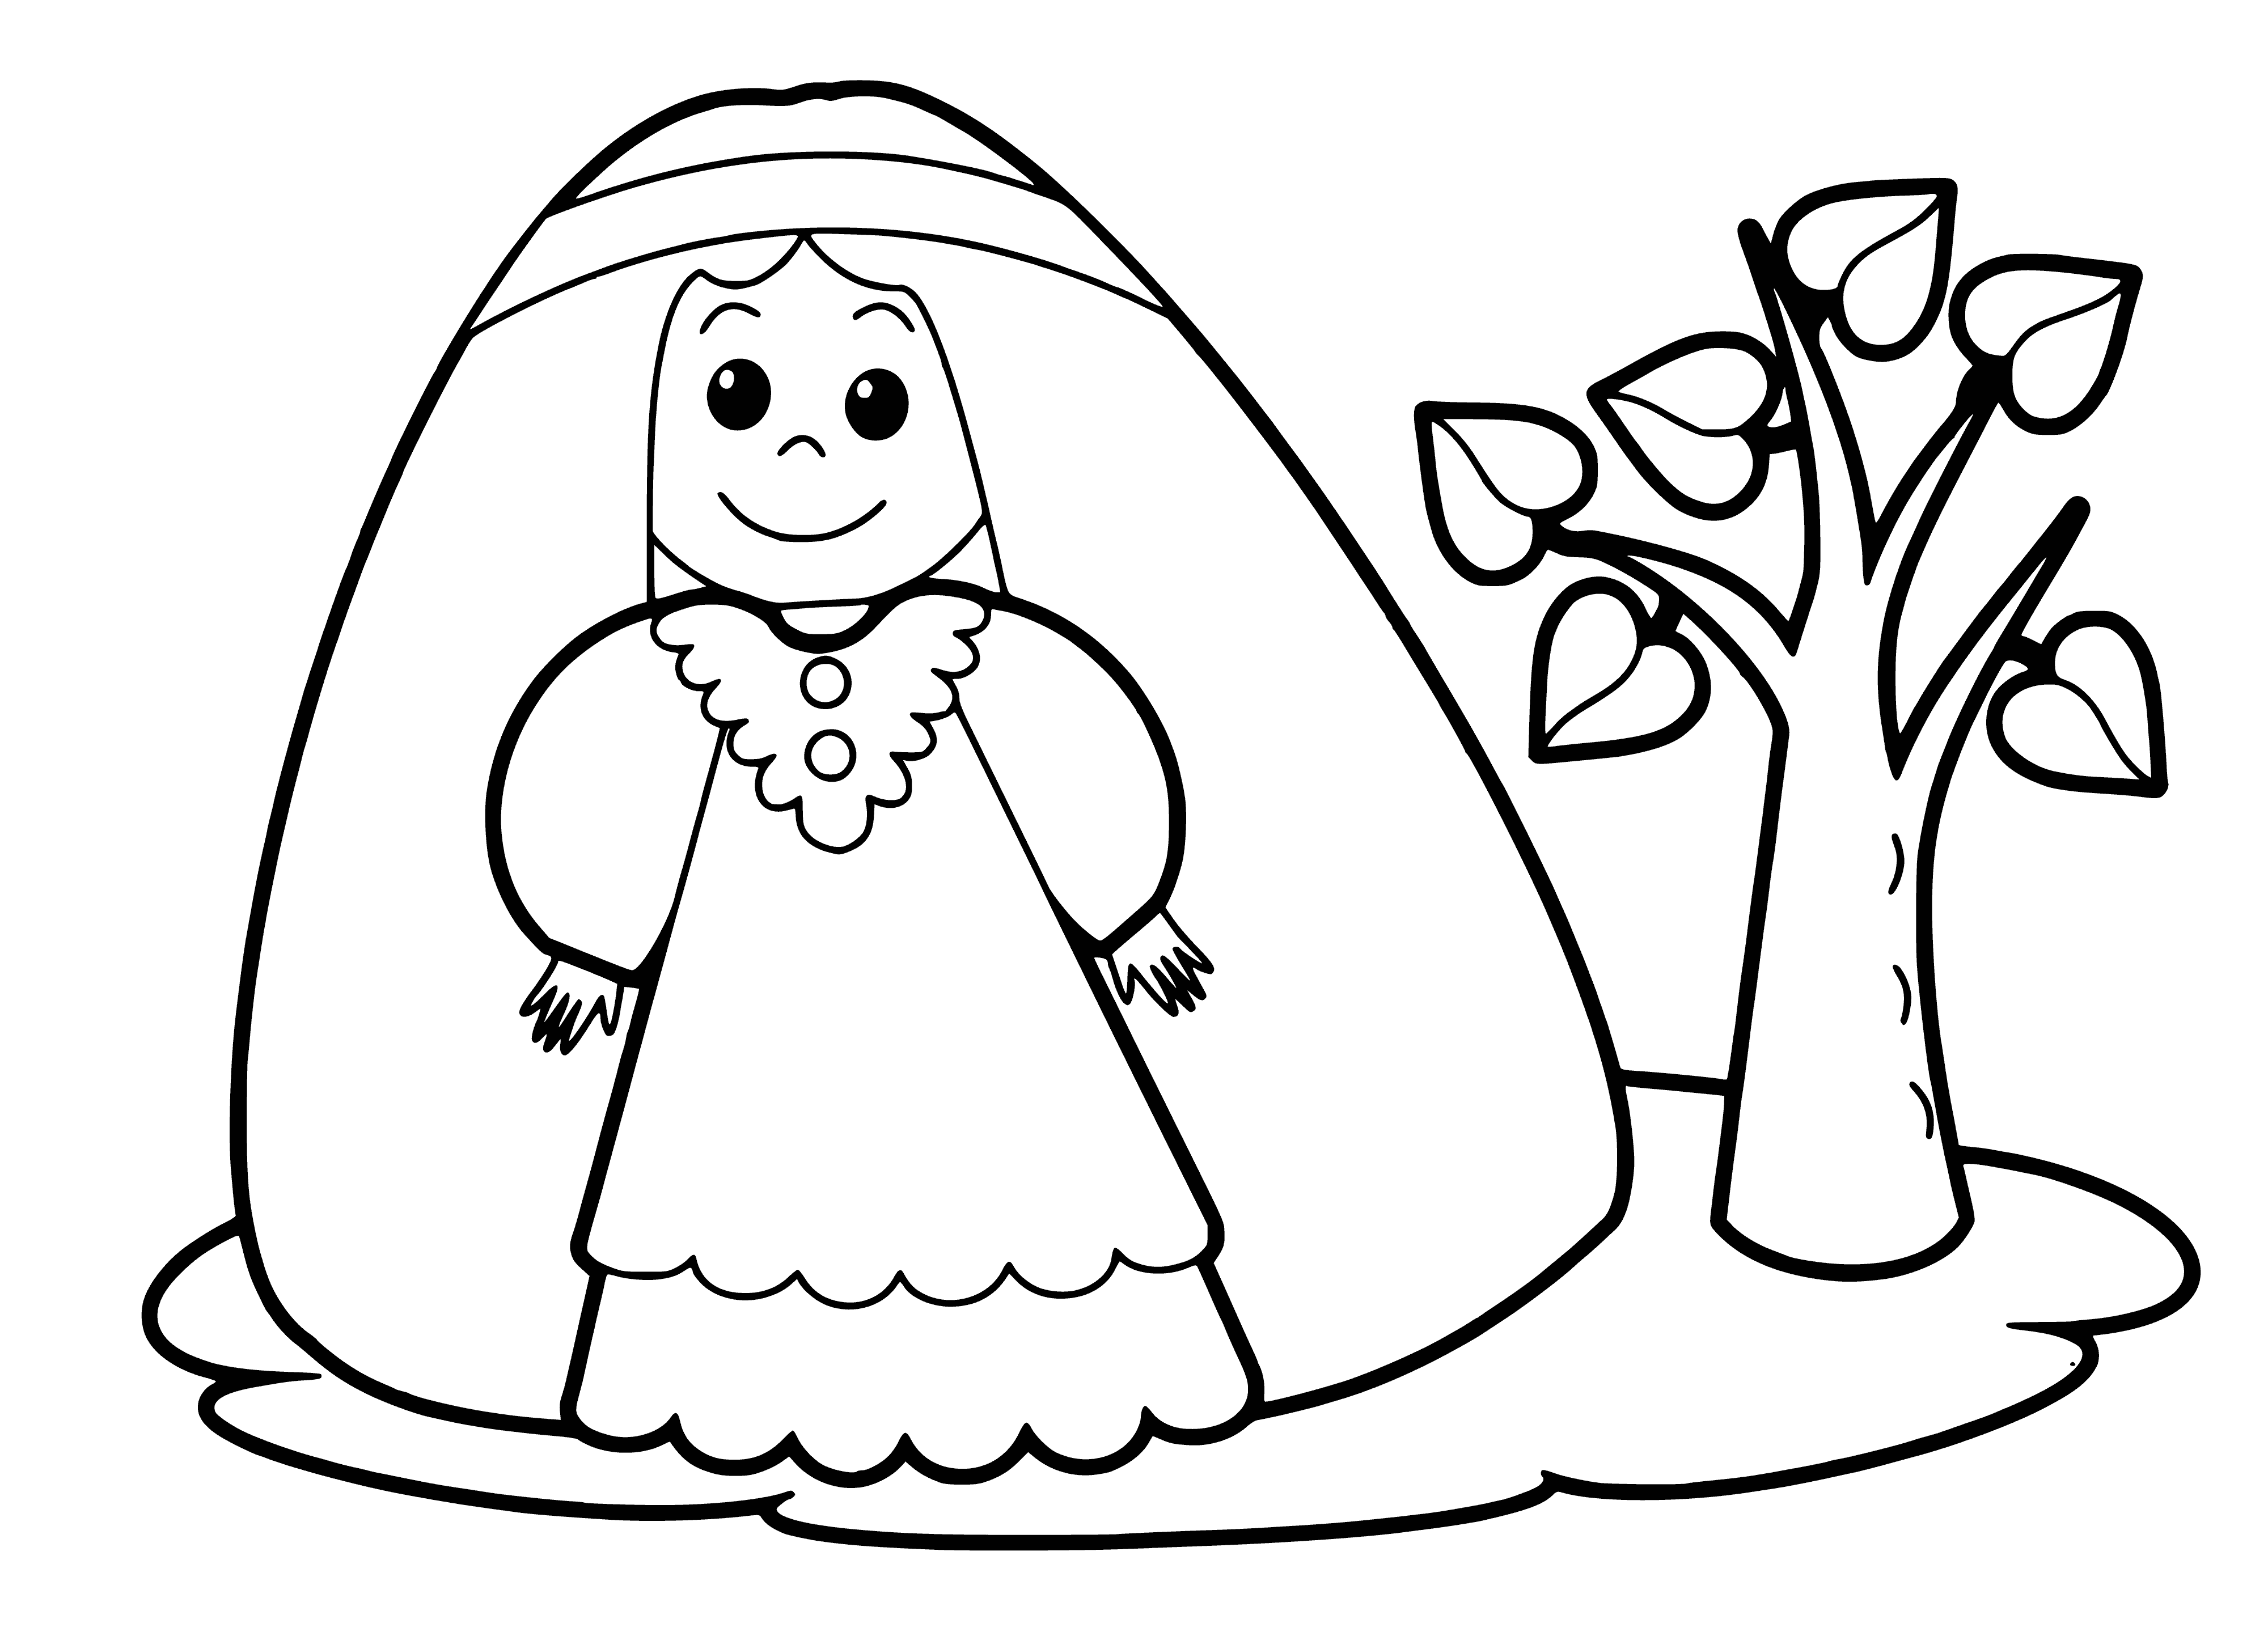 coloring page: Girl in white dress with blue bow admires tree in coloring page.